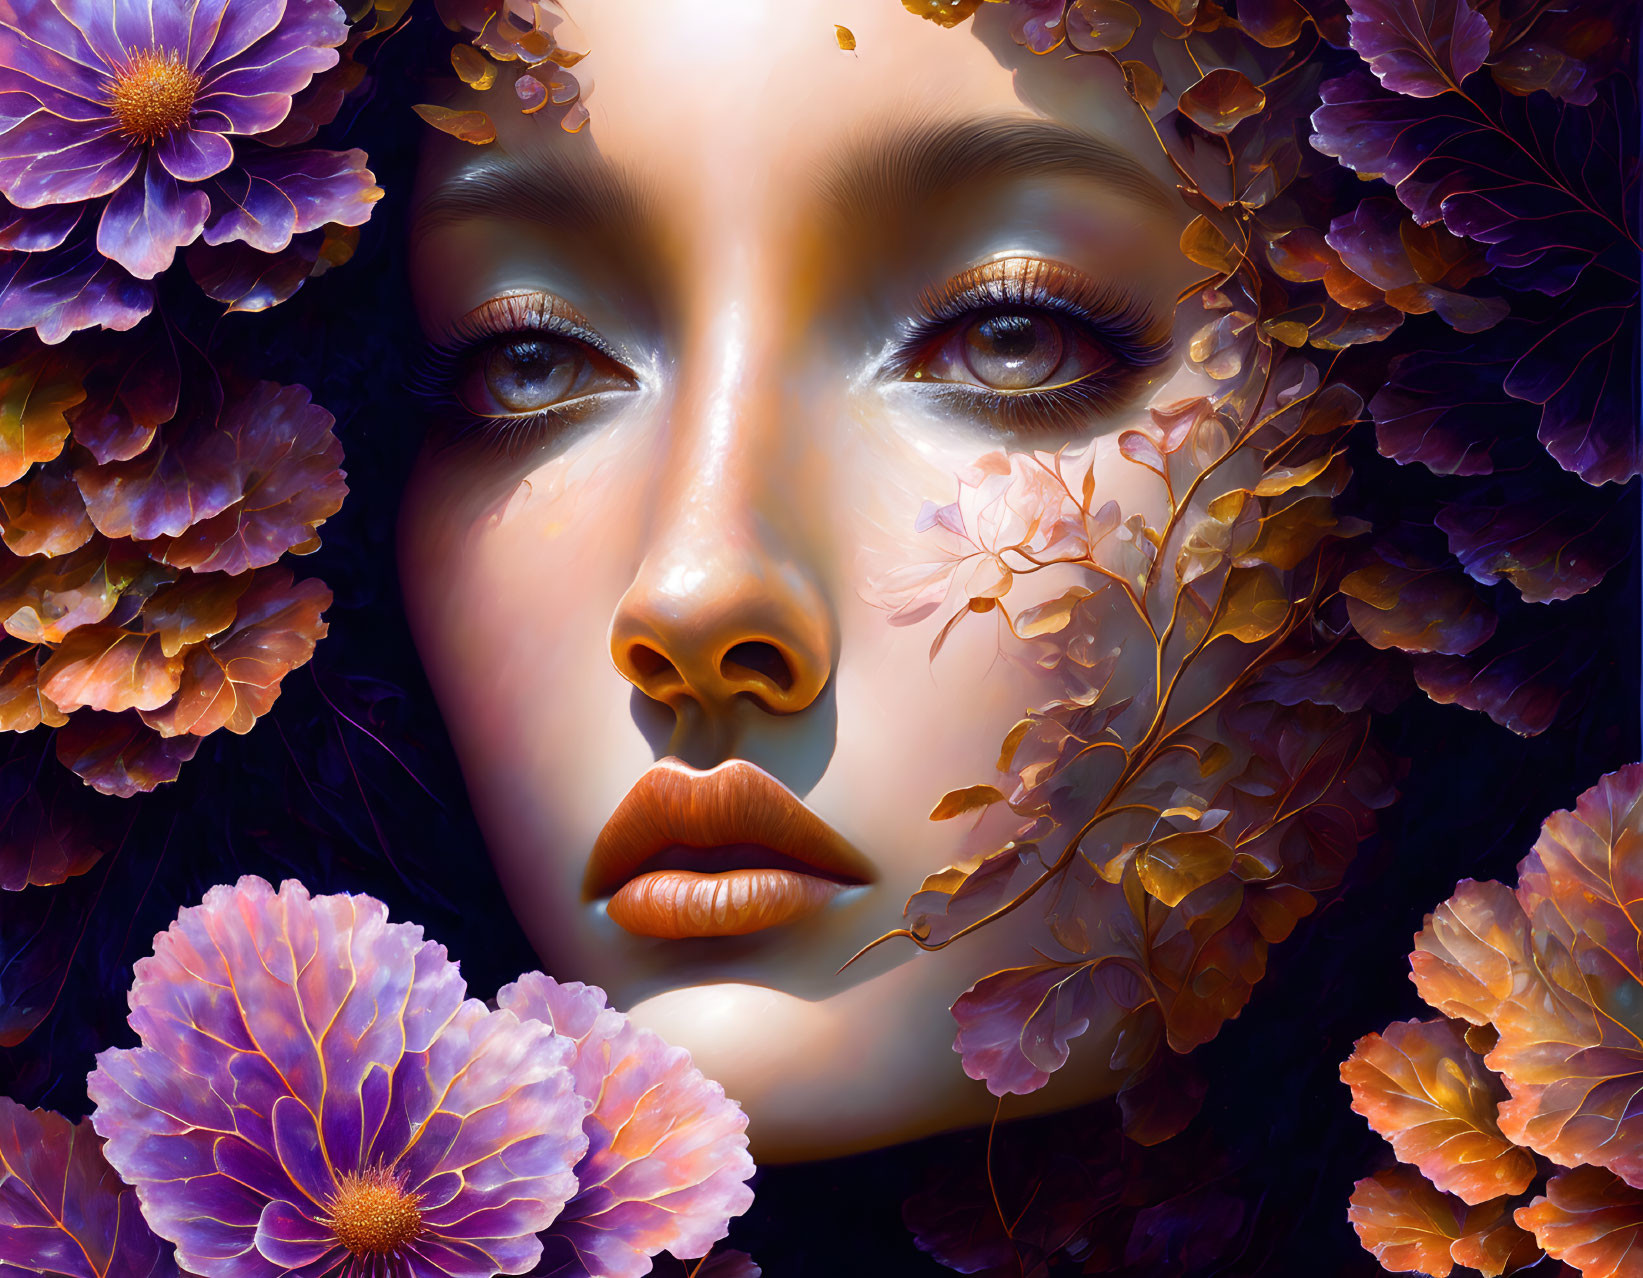 Surreal Woman's Face with Purple Flowers and Autumn Leaves Integration